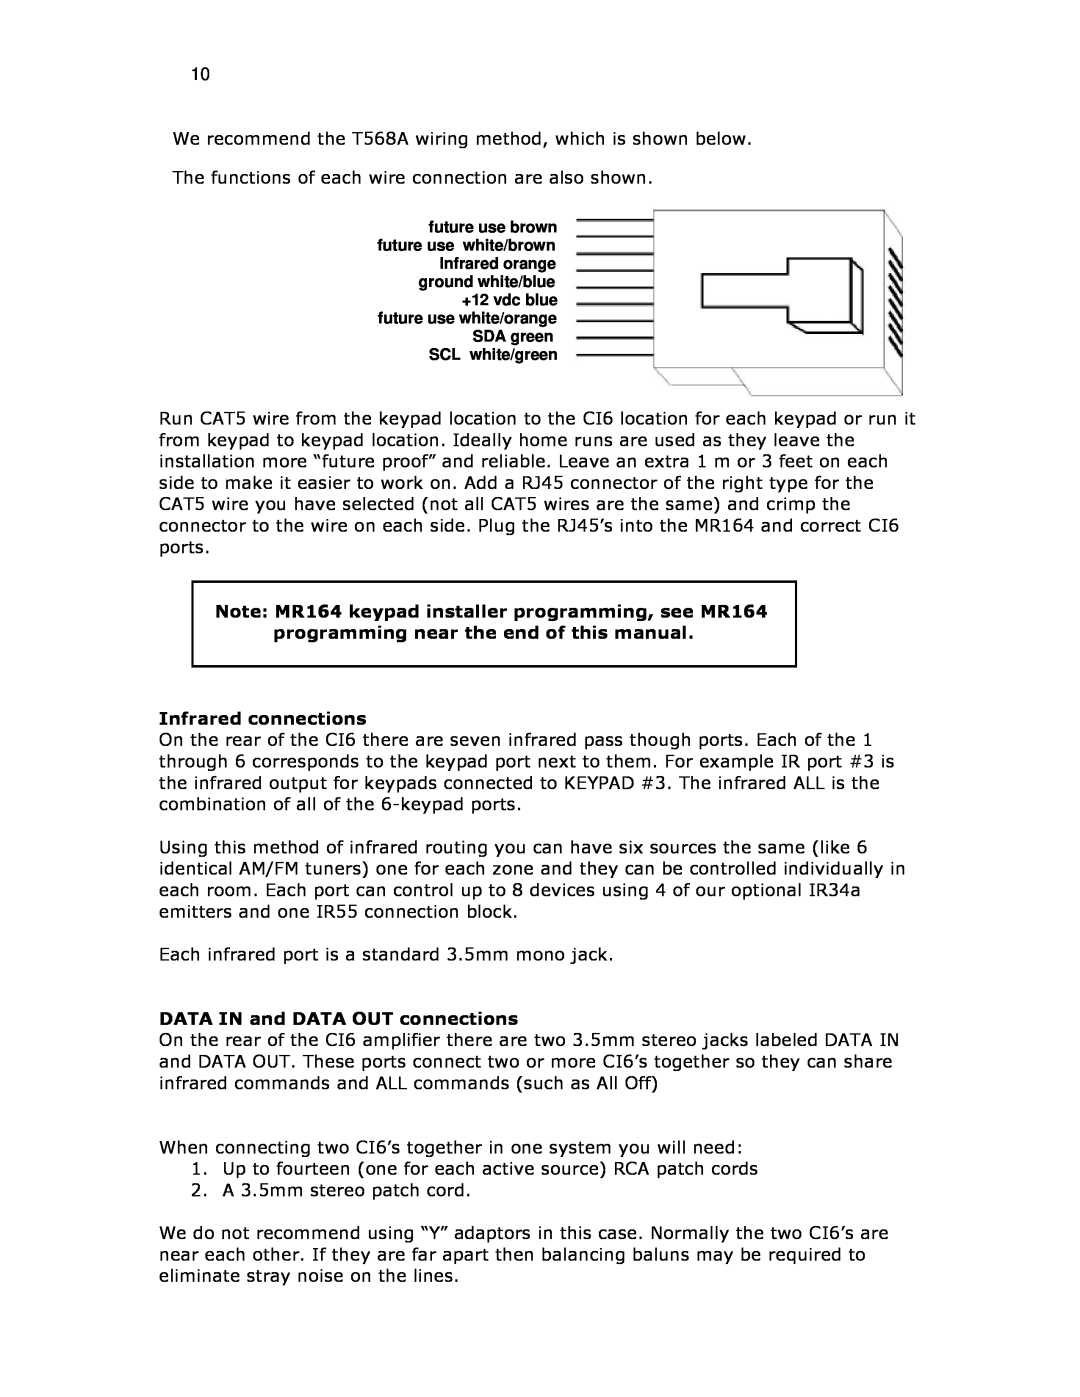 Knoll Systems C16 installation instructions Infrared connections, DATA IN and DATA OUT connections 